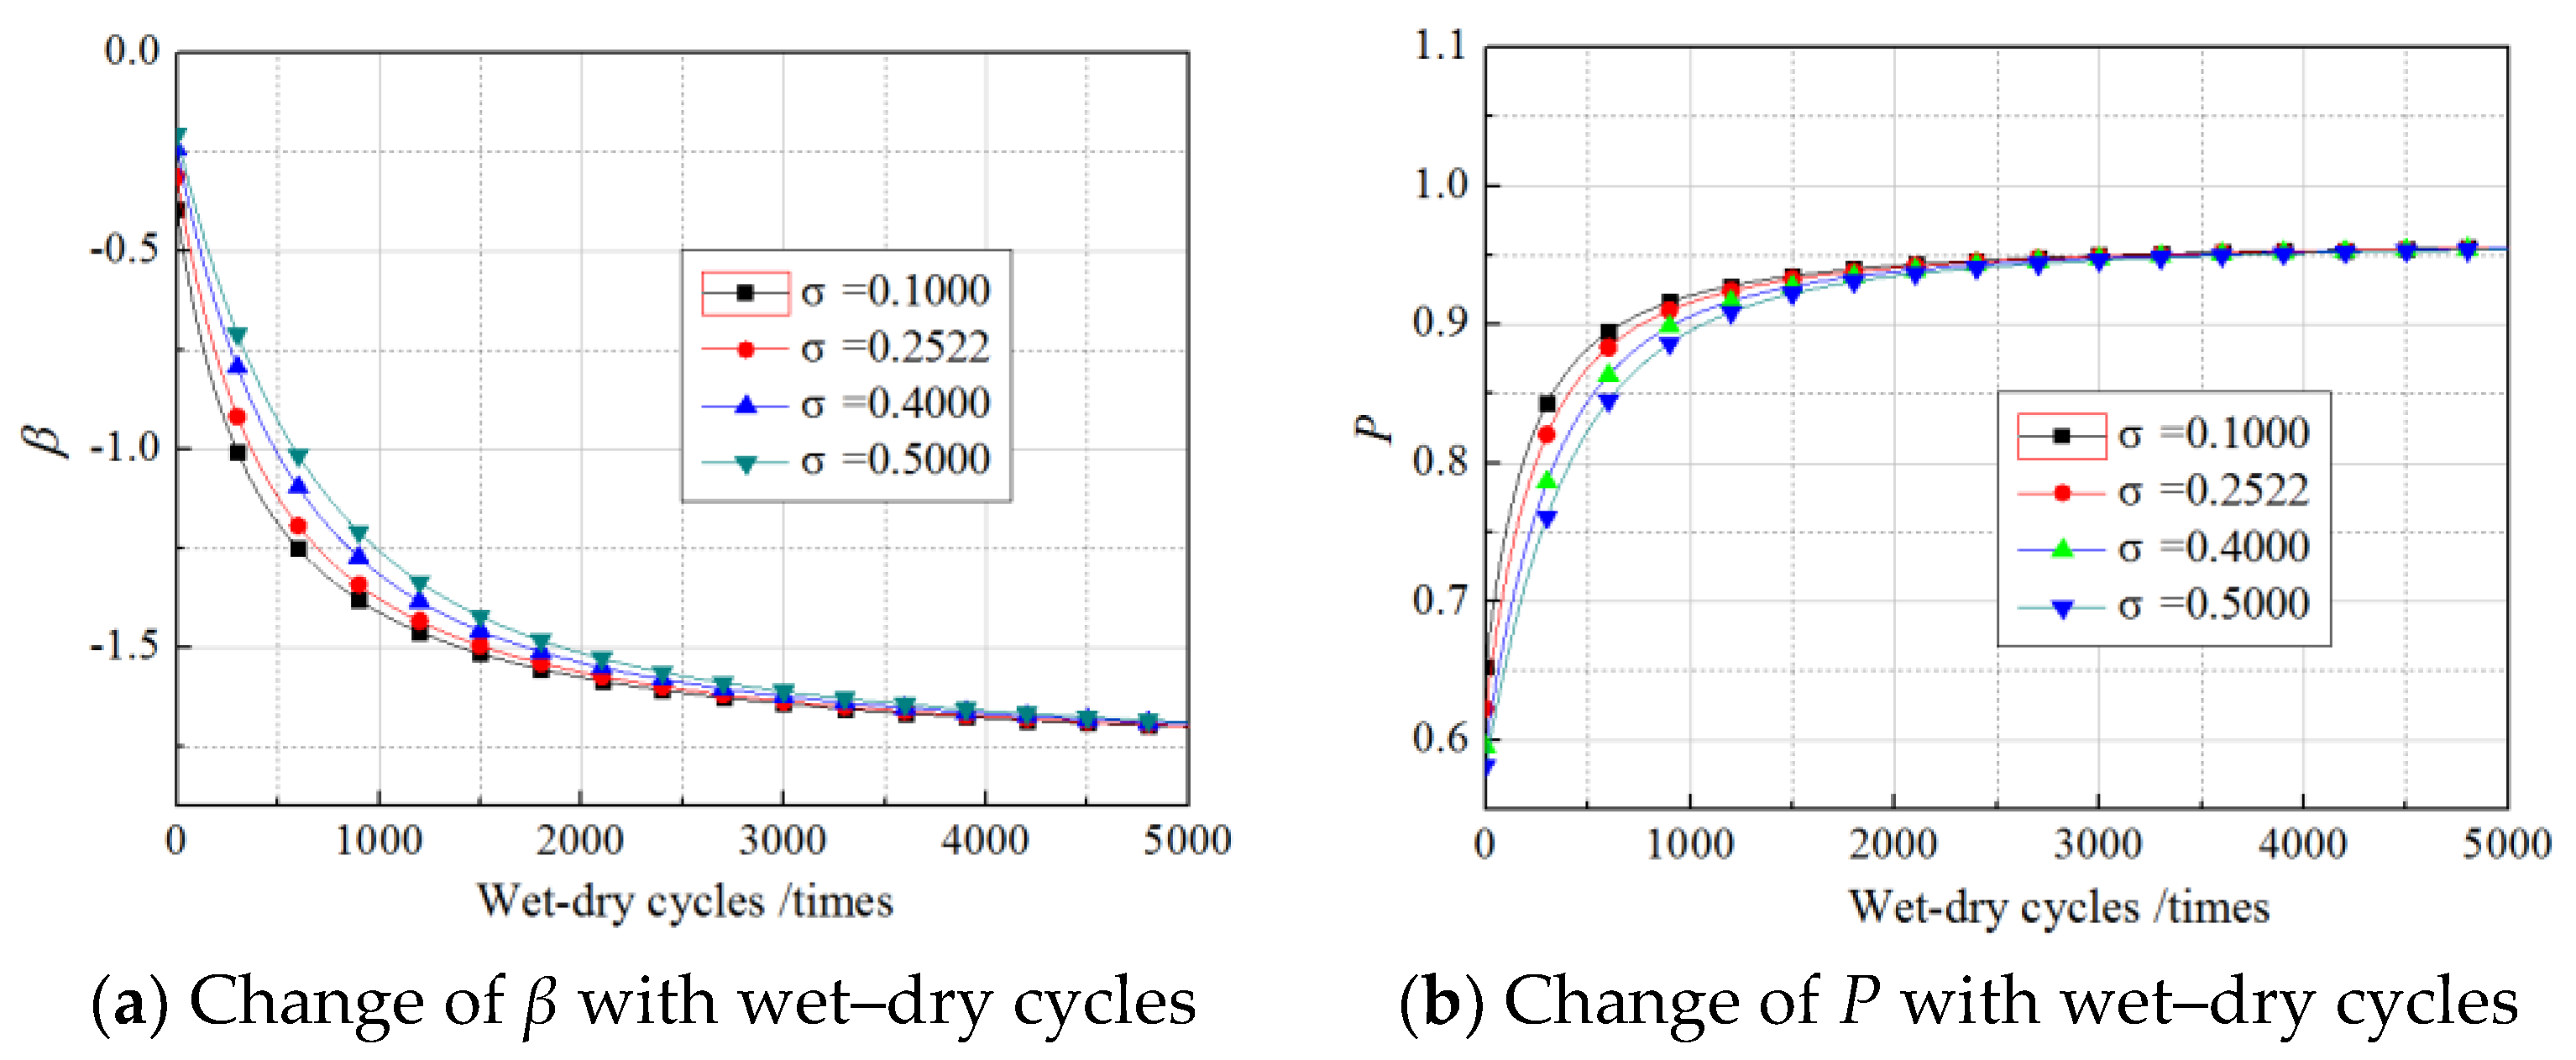 Materials Free Full Text Reliability Analysis Of Bond Behaviour Of Cfrp Concrete Interface Under Wet Dry Cycles Html